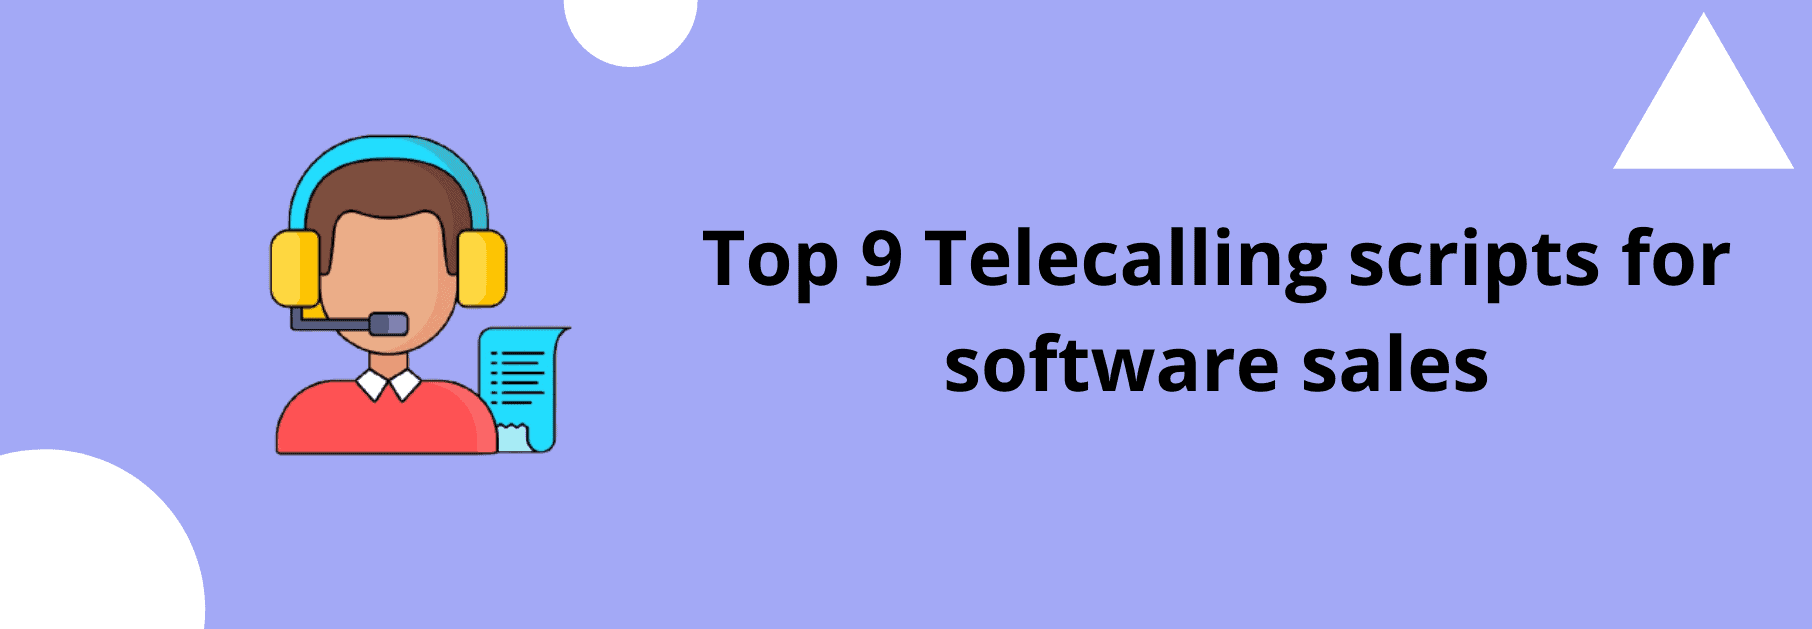 Telecalling scripts for software sales